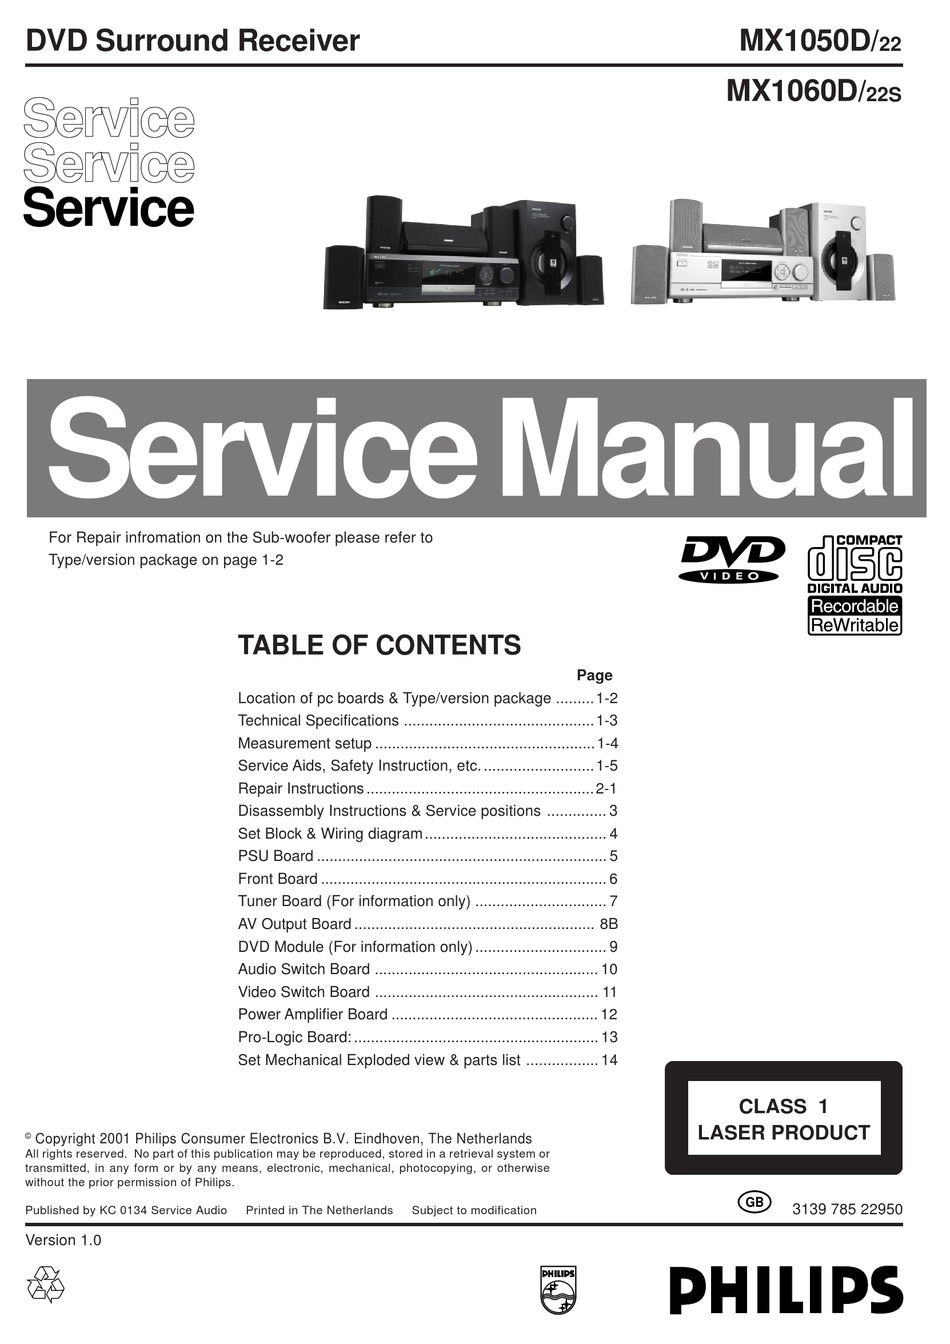 Service manual philips. Philips mx1050d Subwoofer. Philips mx5700d. Philips DFR 1500 service manual. "Philips 150s service manual".